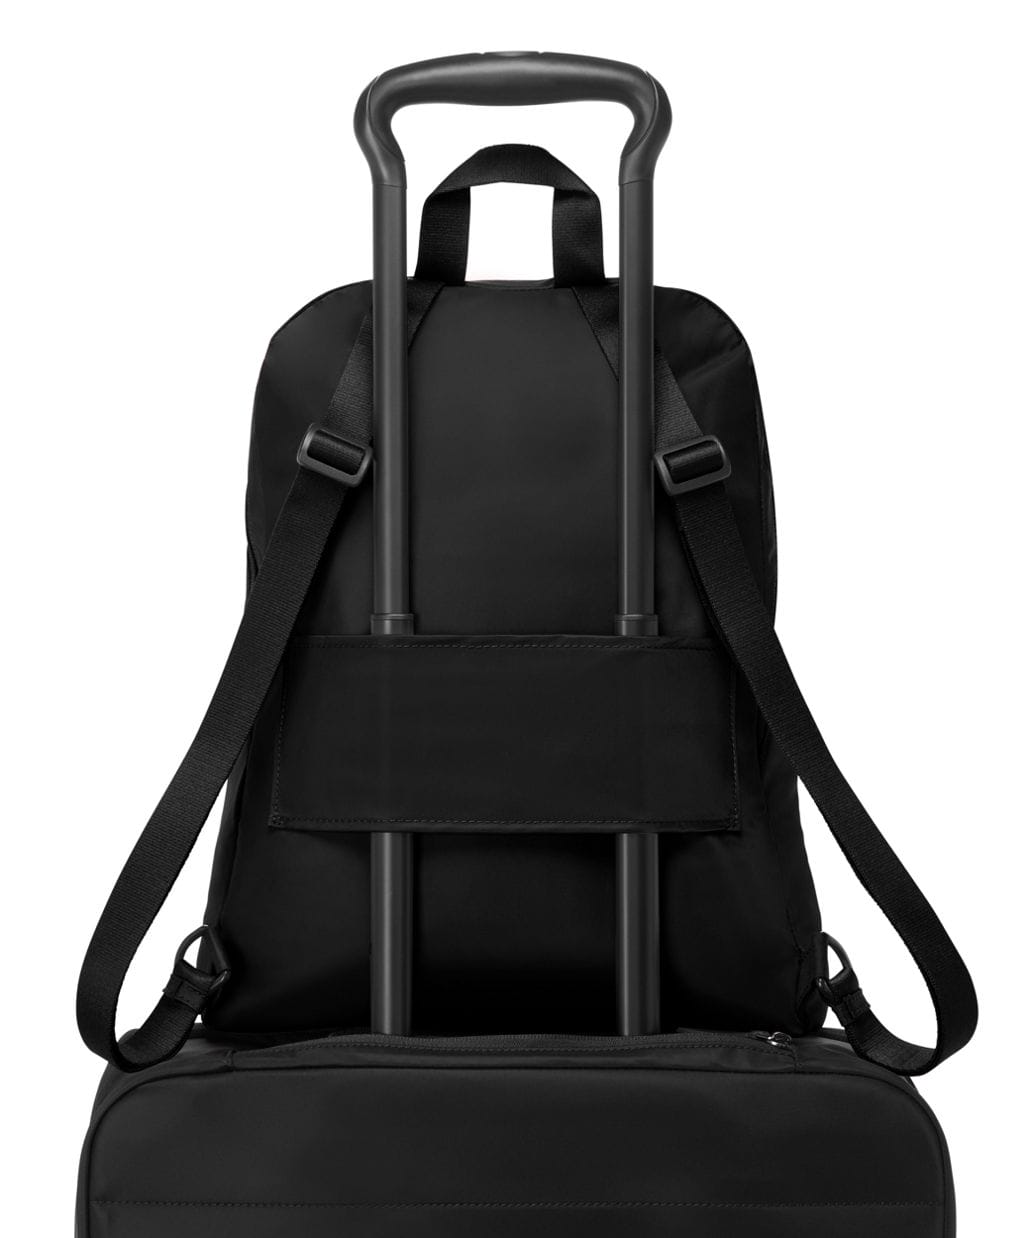 Tumi - Voyageur Just in Case Backpack - Black/Gold